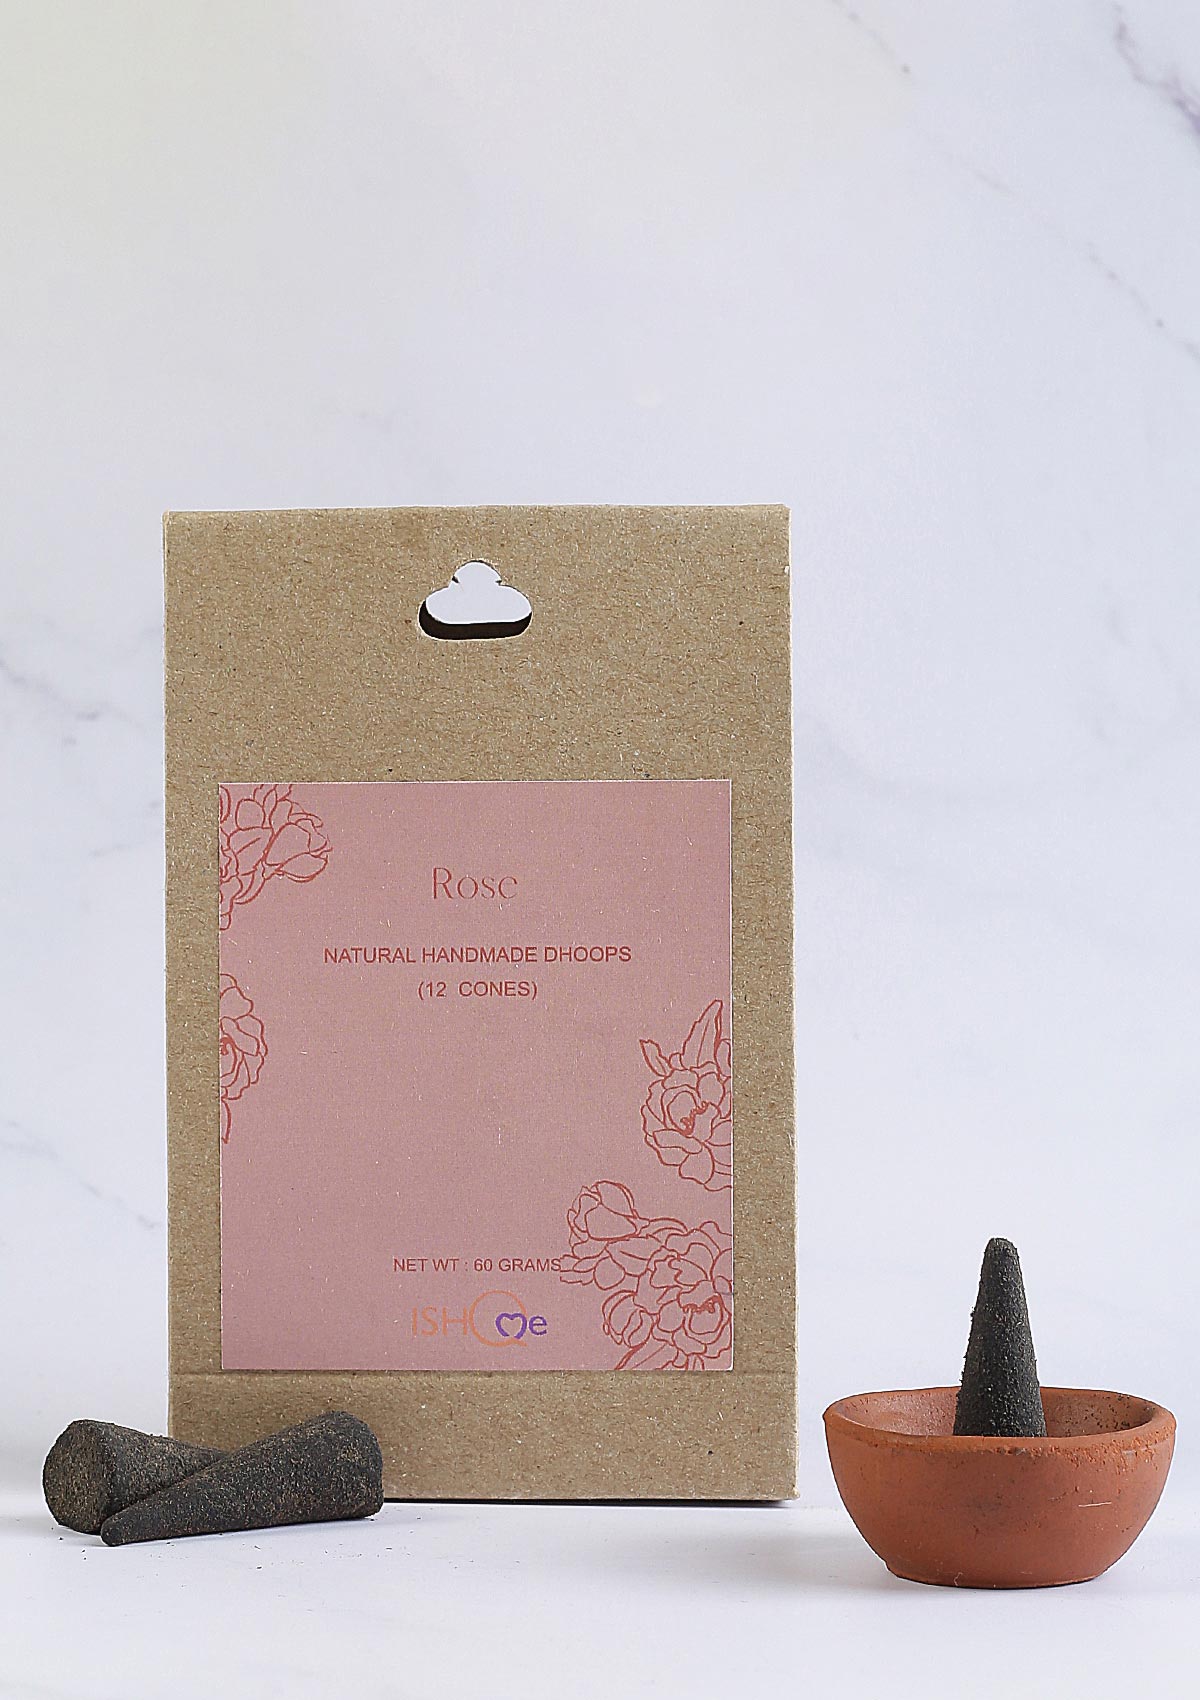 Fragrant Bliss: IshqMe's Rose and Jasmine Incense Cones with Deep Blue Stand - IshqMe